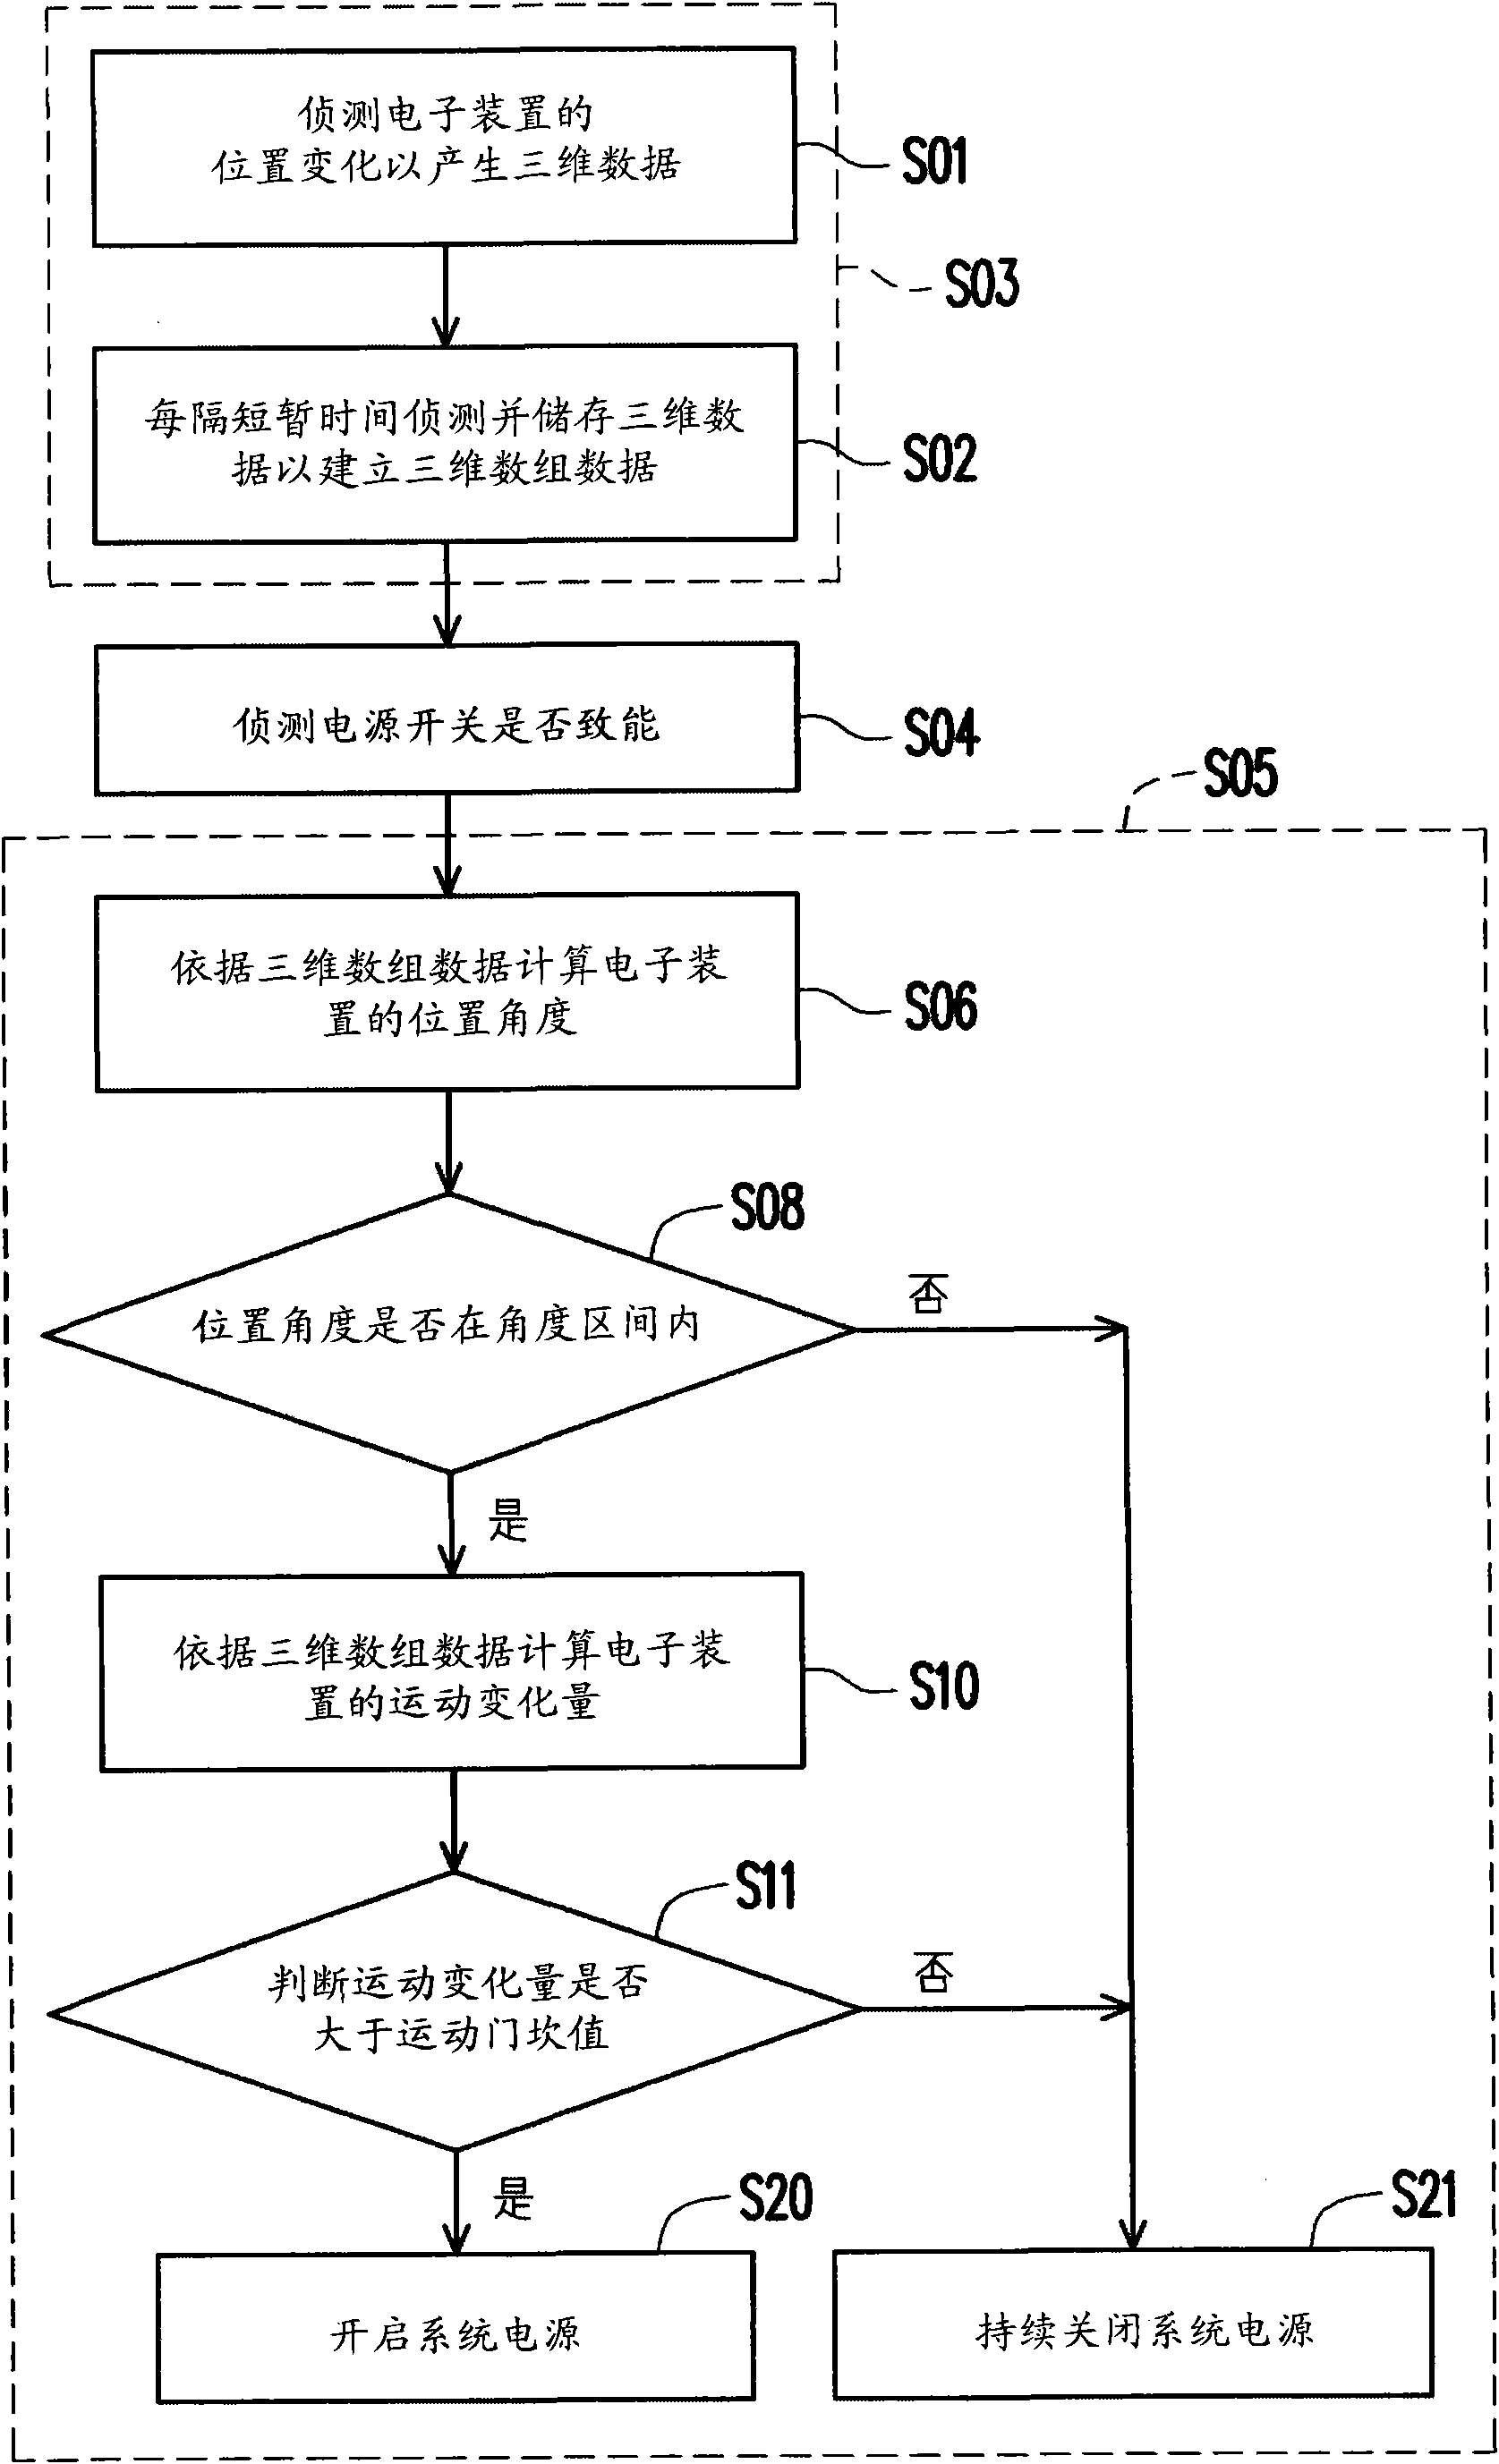 Method and device for avoiding erroneous touch of power switch